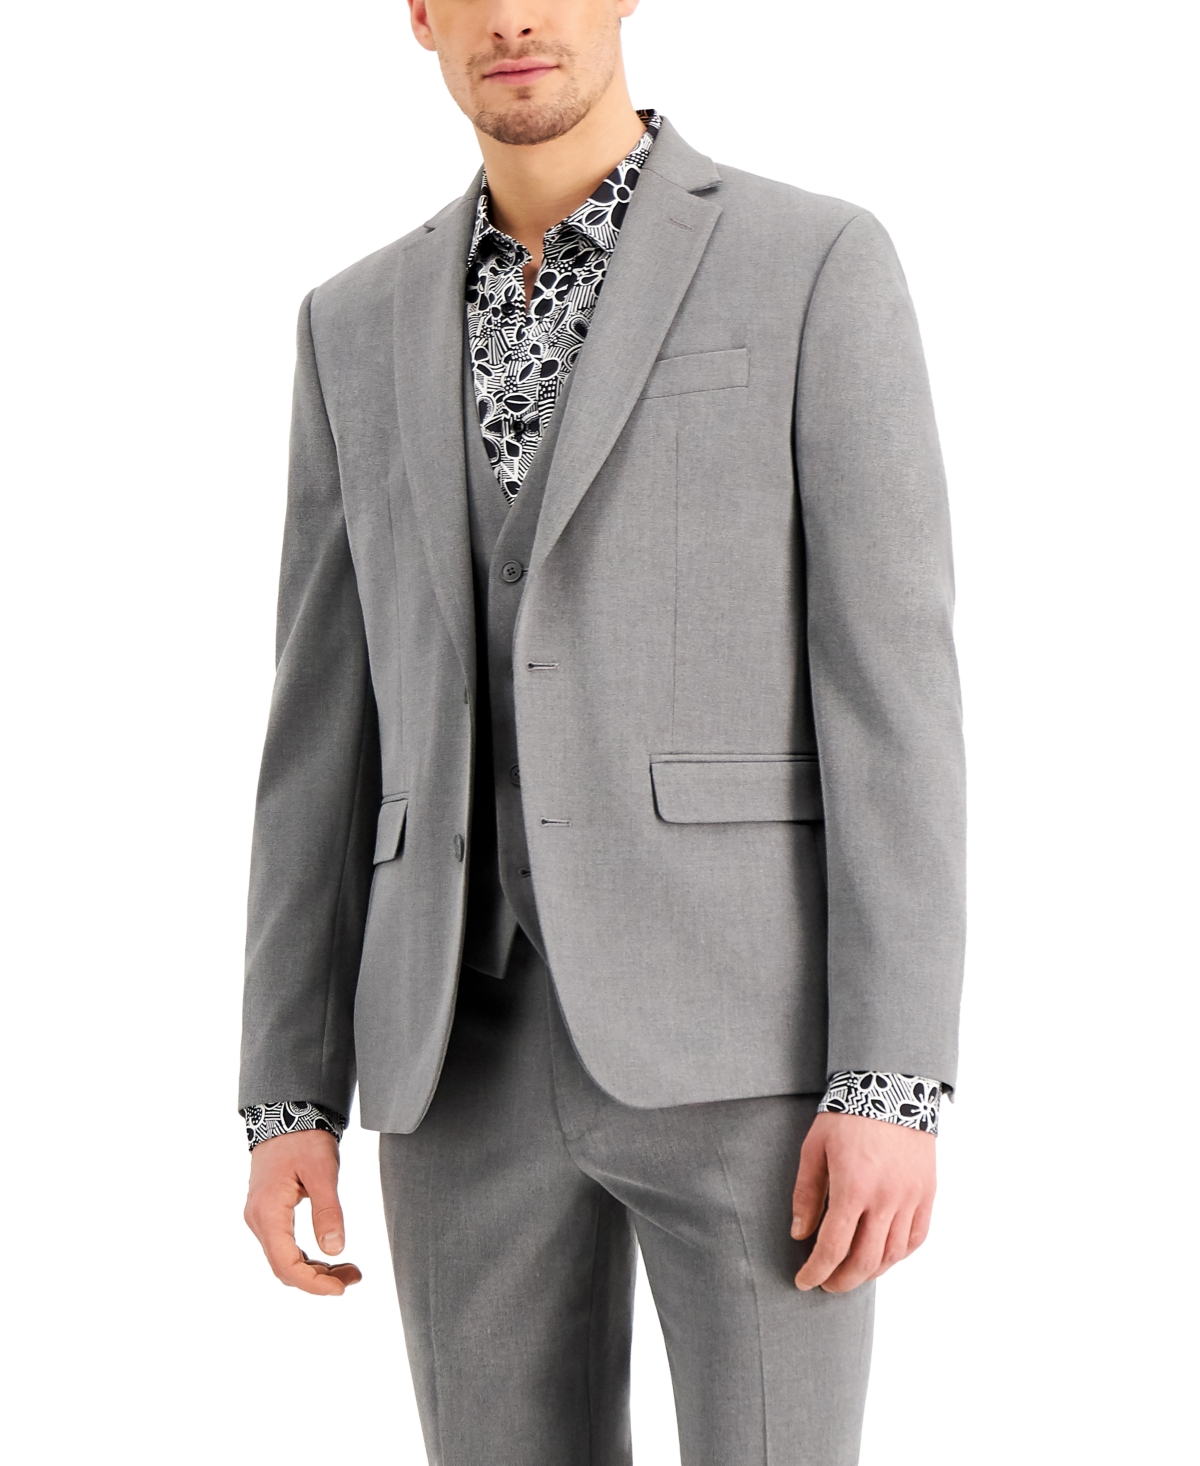 Men's Slim-Fit Gray Solid Suit Jacket, Created for Macy's - Pure Grey